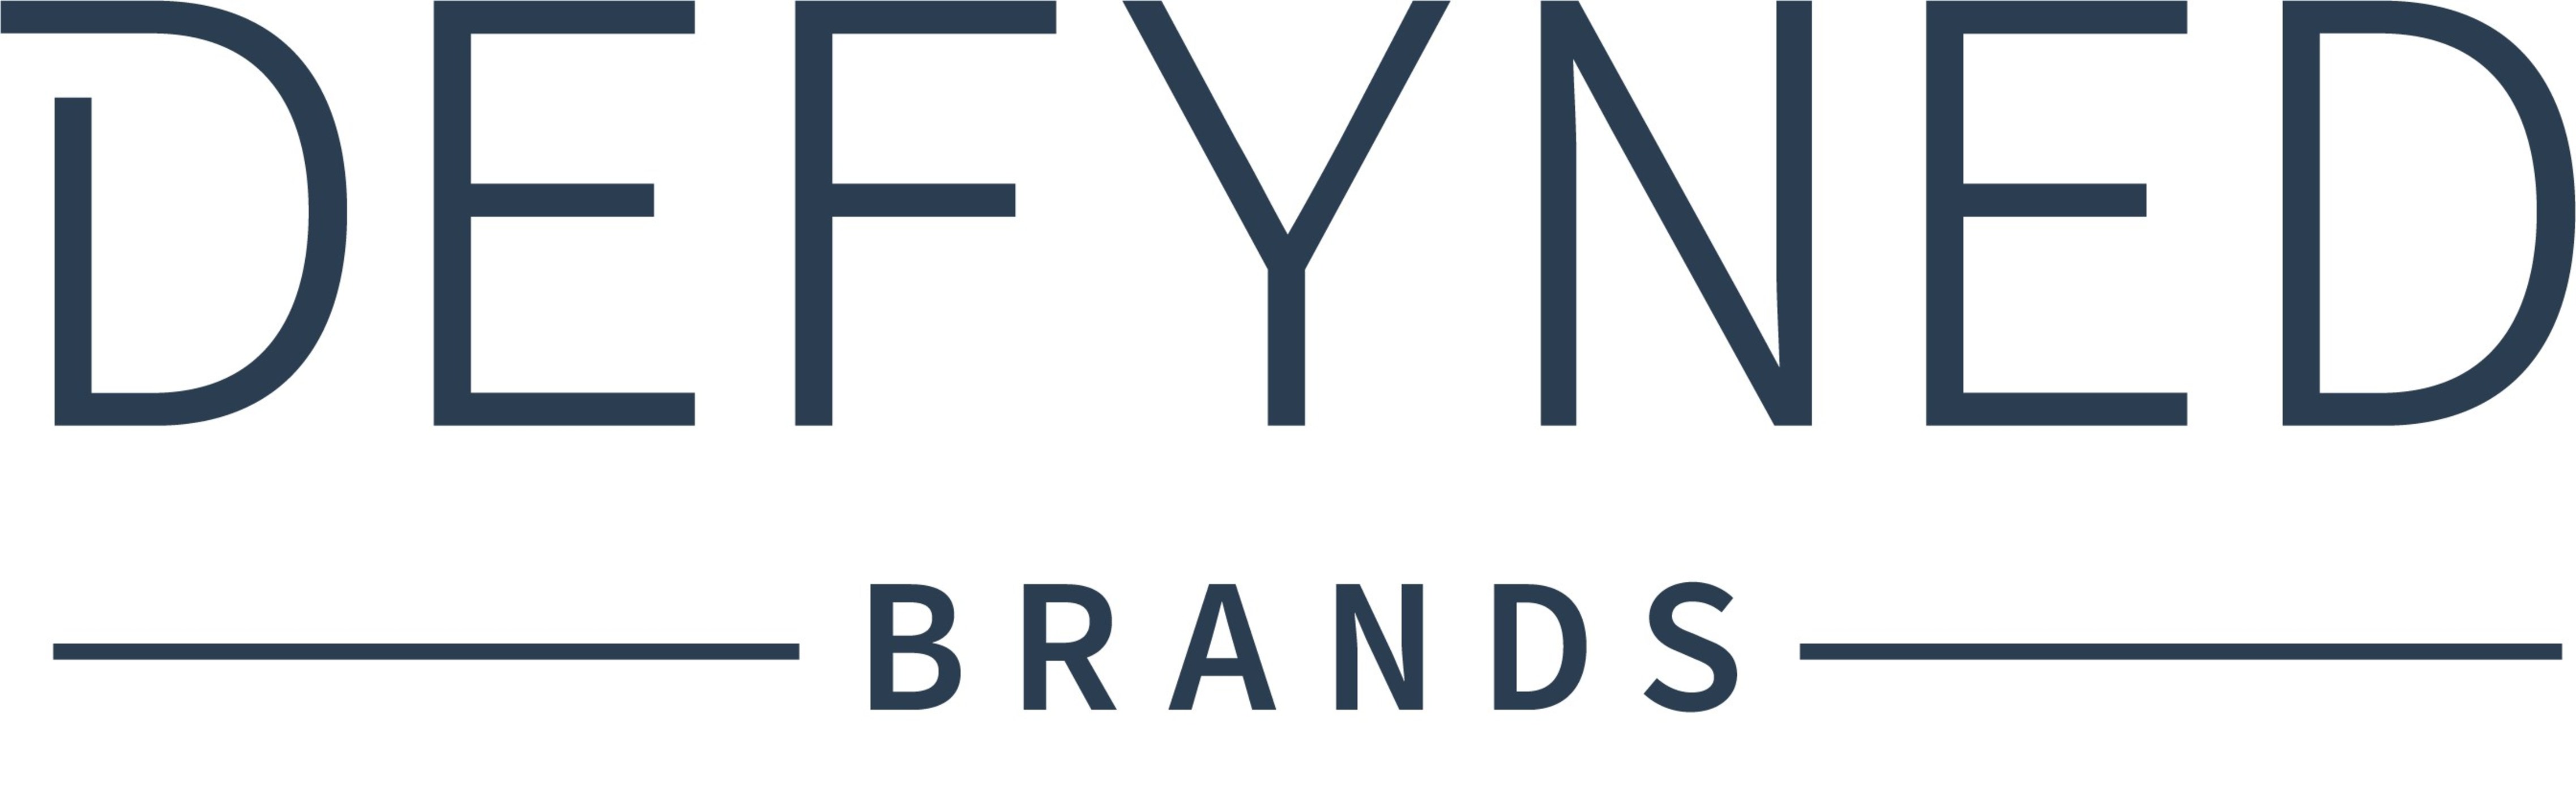 Defyned Brands Adds To Leadership Team, Redefines Strategy To Grow 25% ...